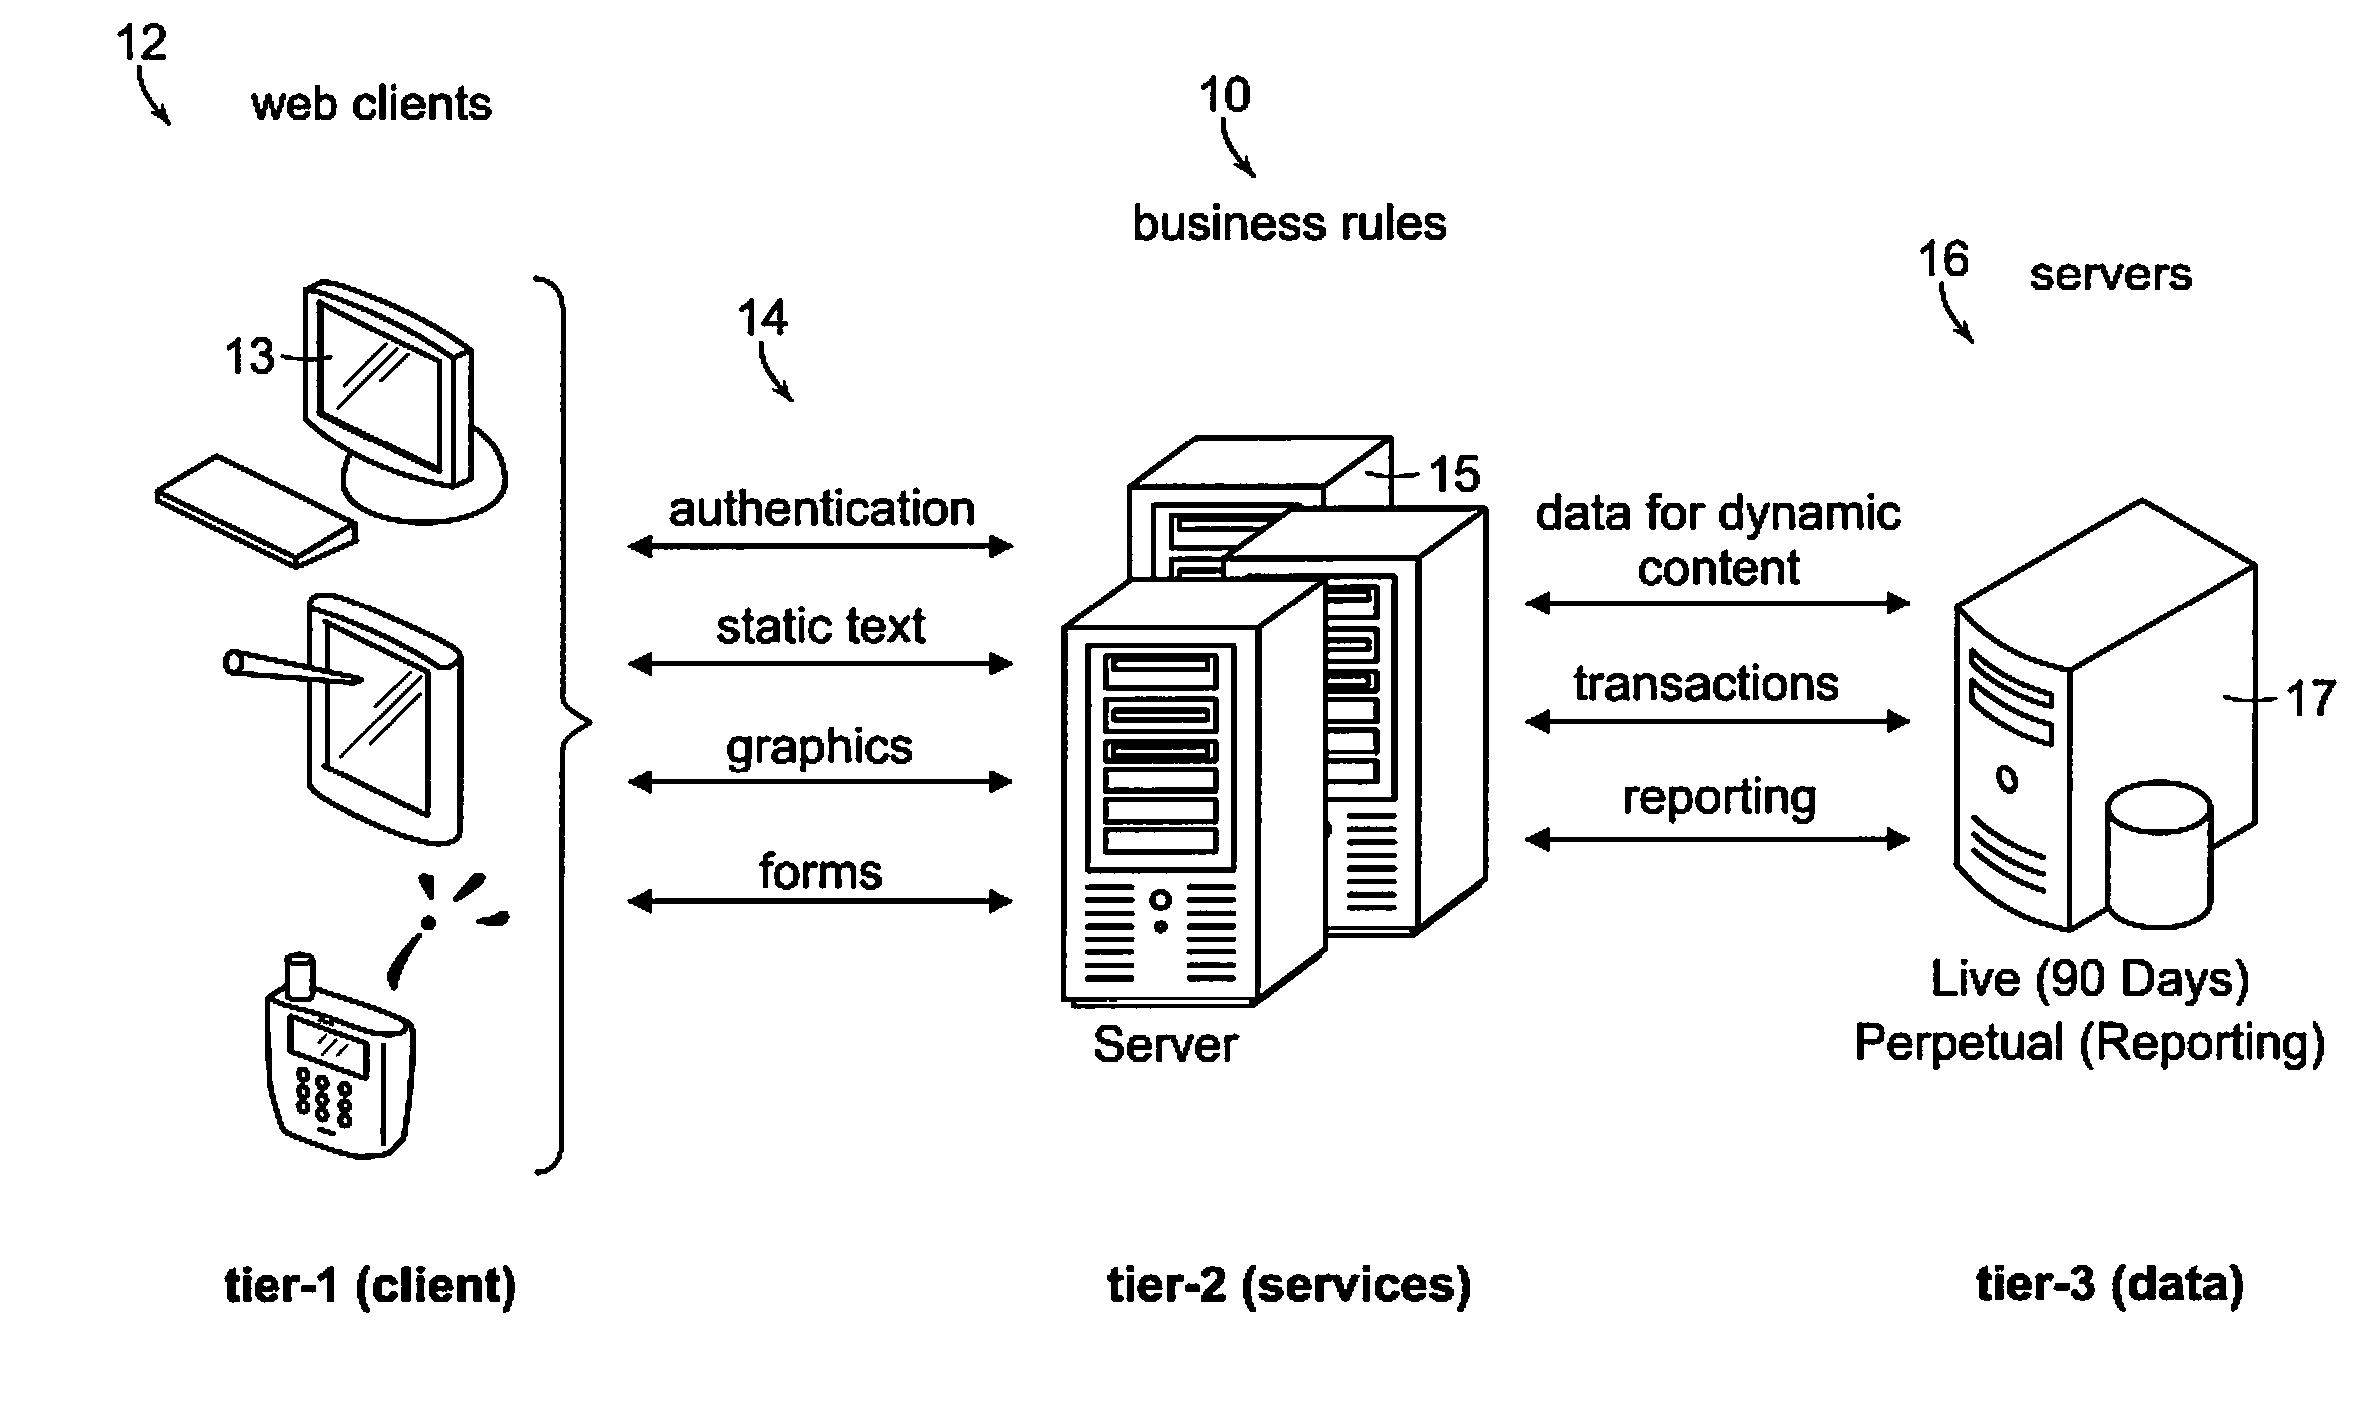 System and method for mortgage application recording